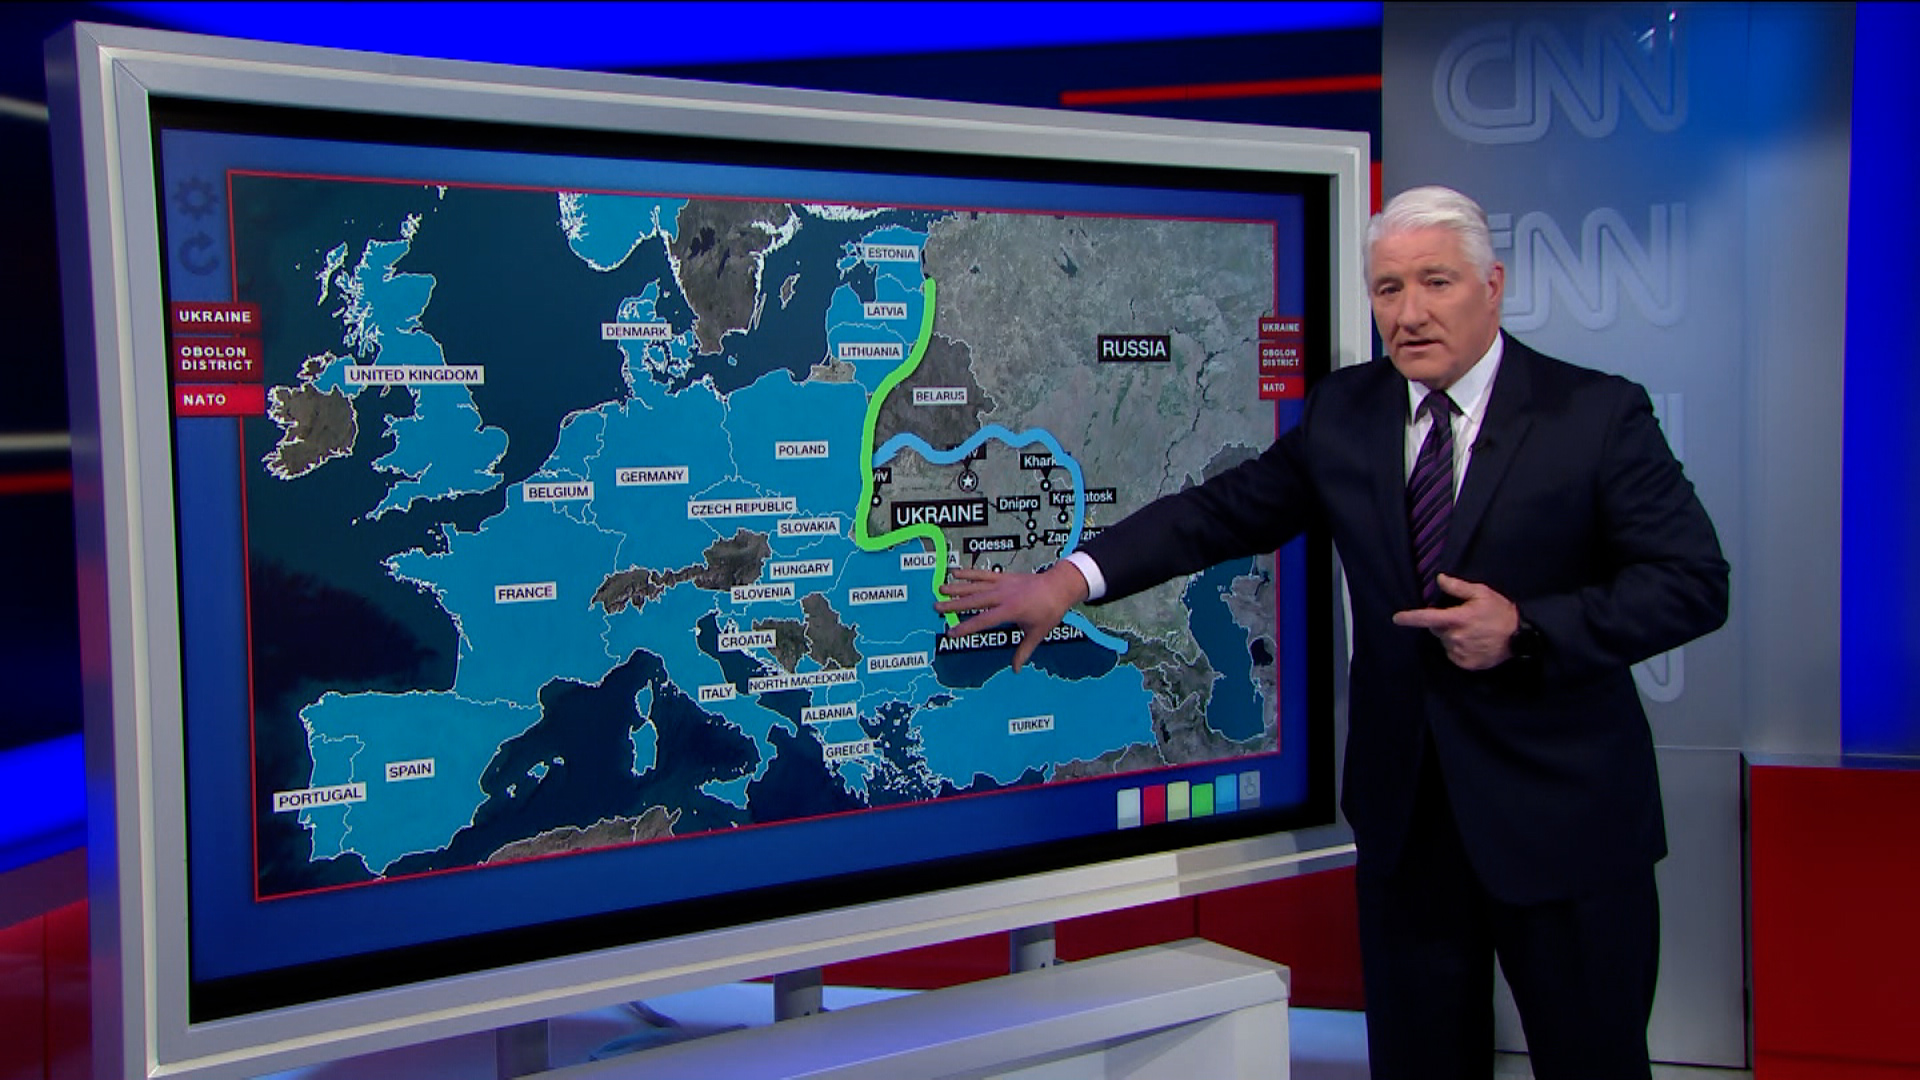 How A Russia Controlled Ukraine Could Extend New Iron Curtain Across Europe Cnn 